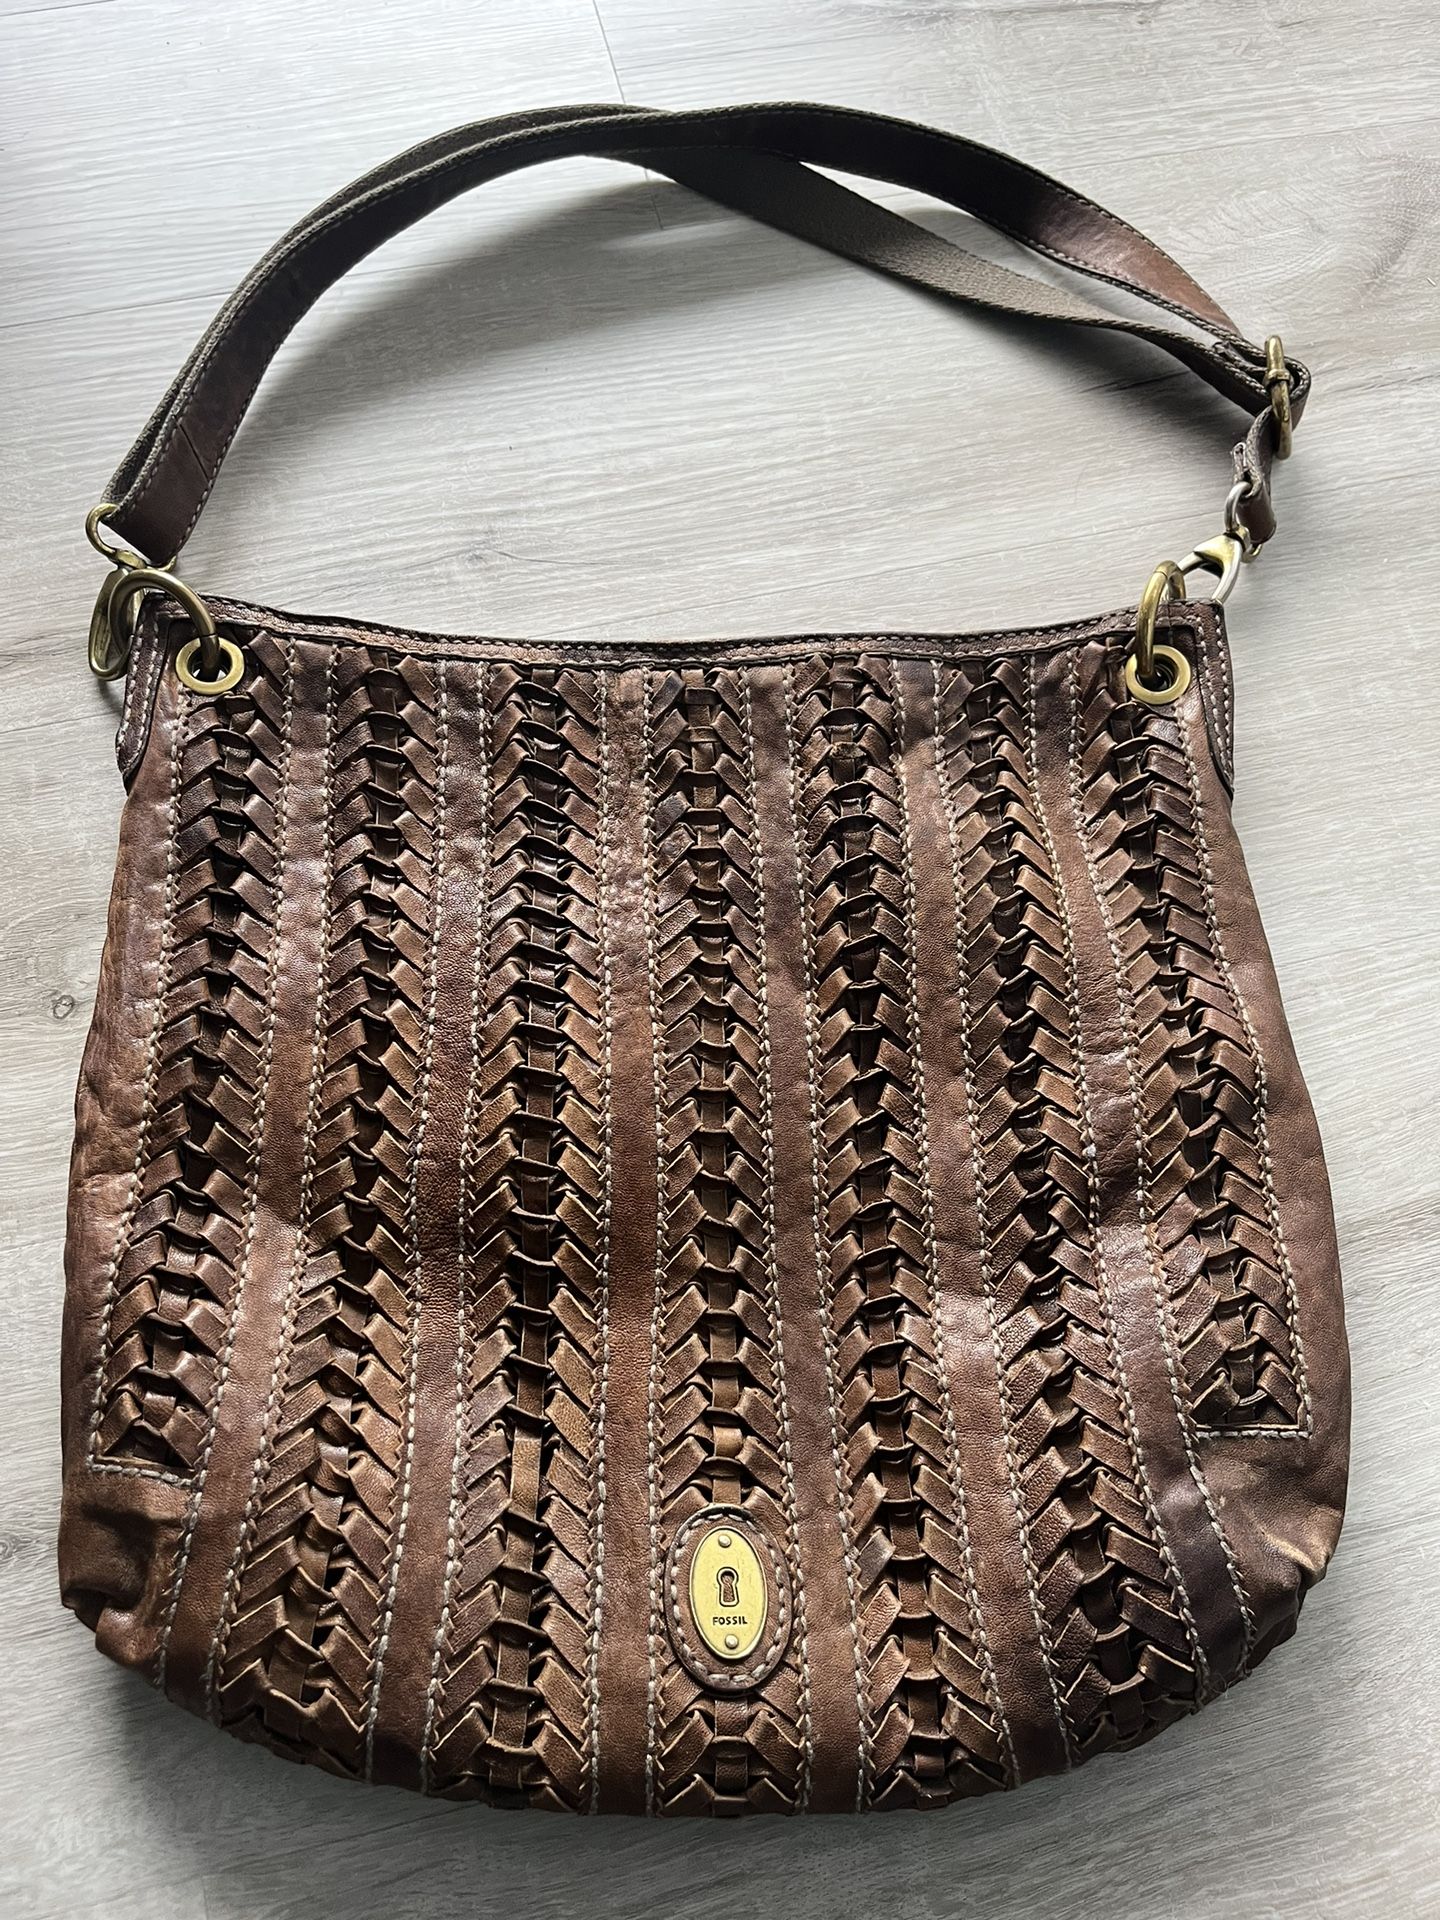 Fossil Brown Leather Weave Purse